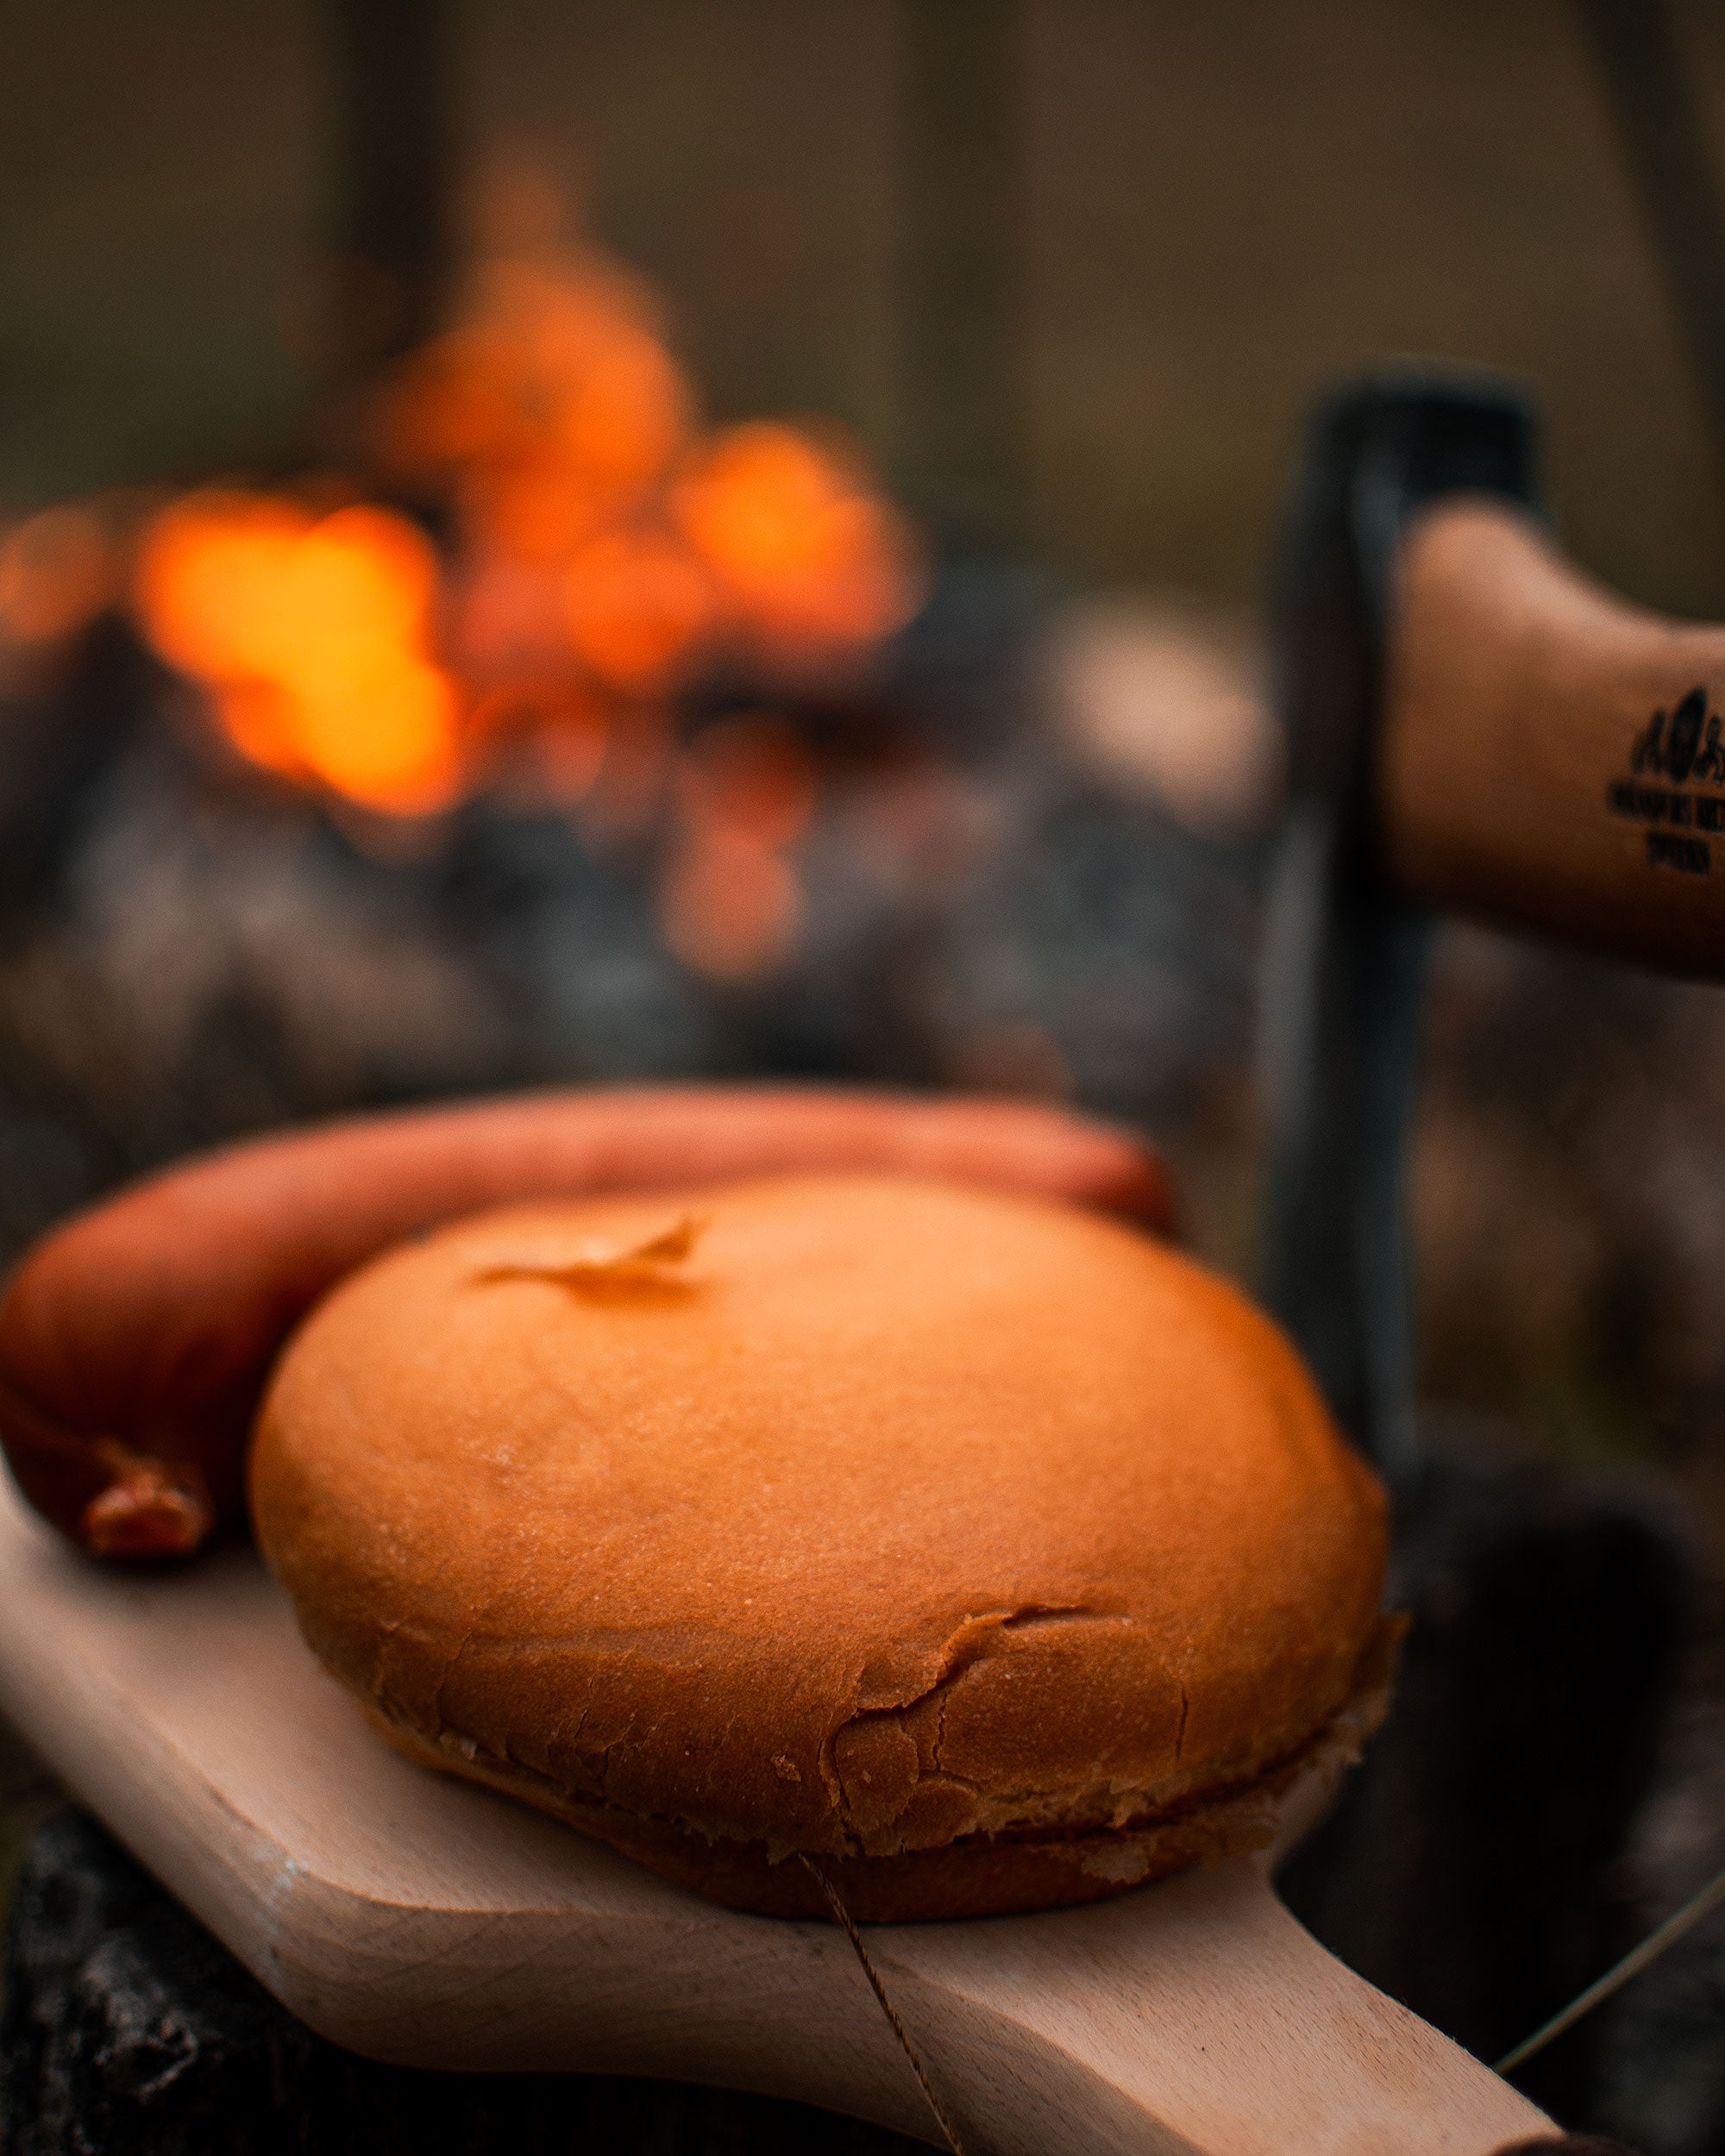 Bushcraft vs. Camping: What's the Difference? The Wild Buck